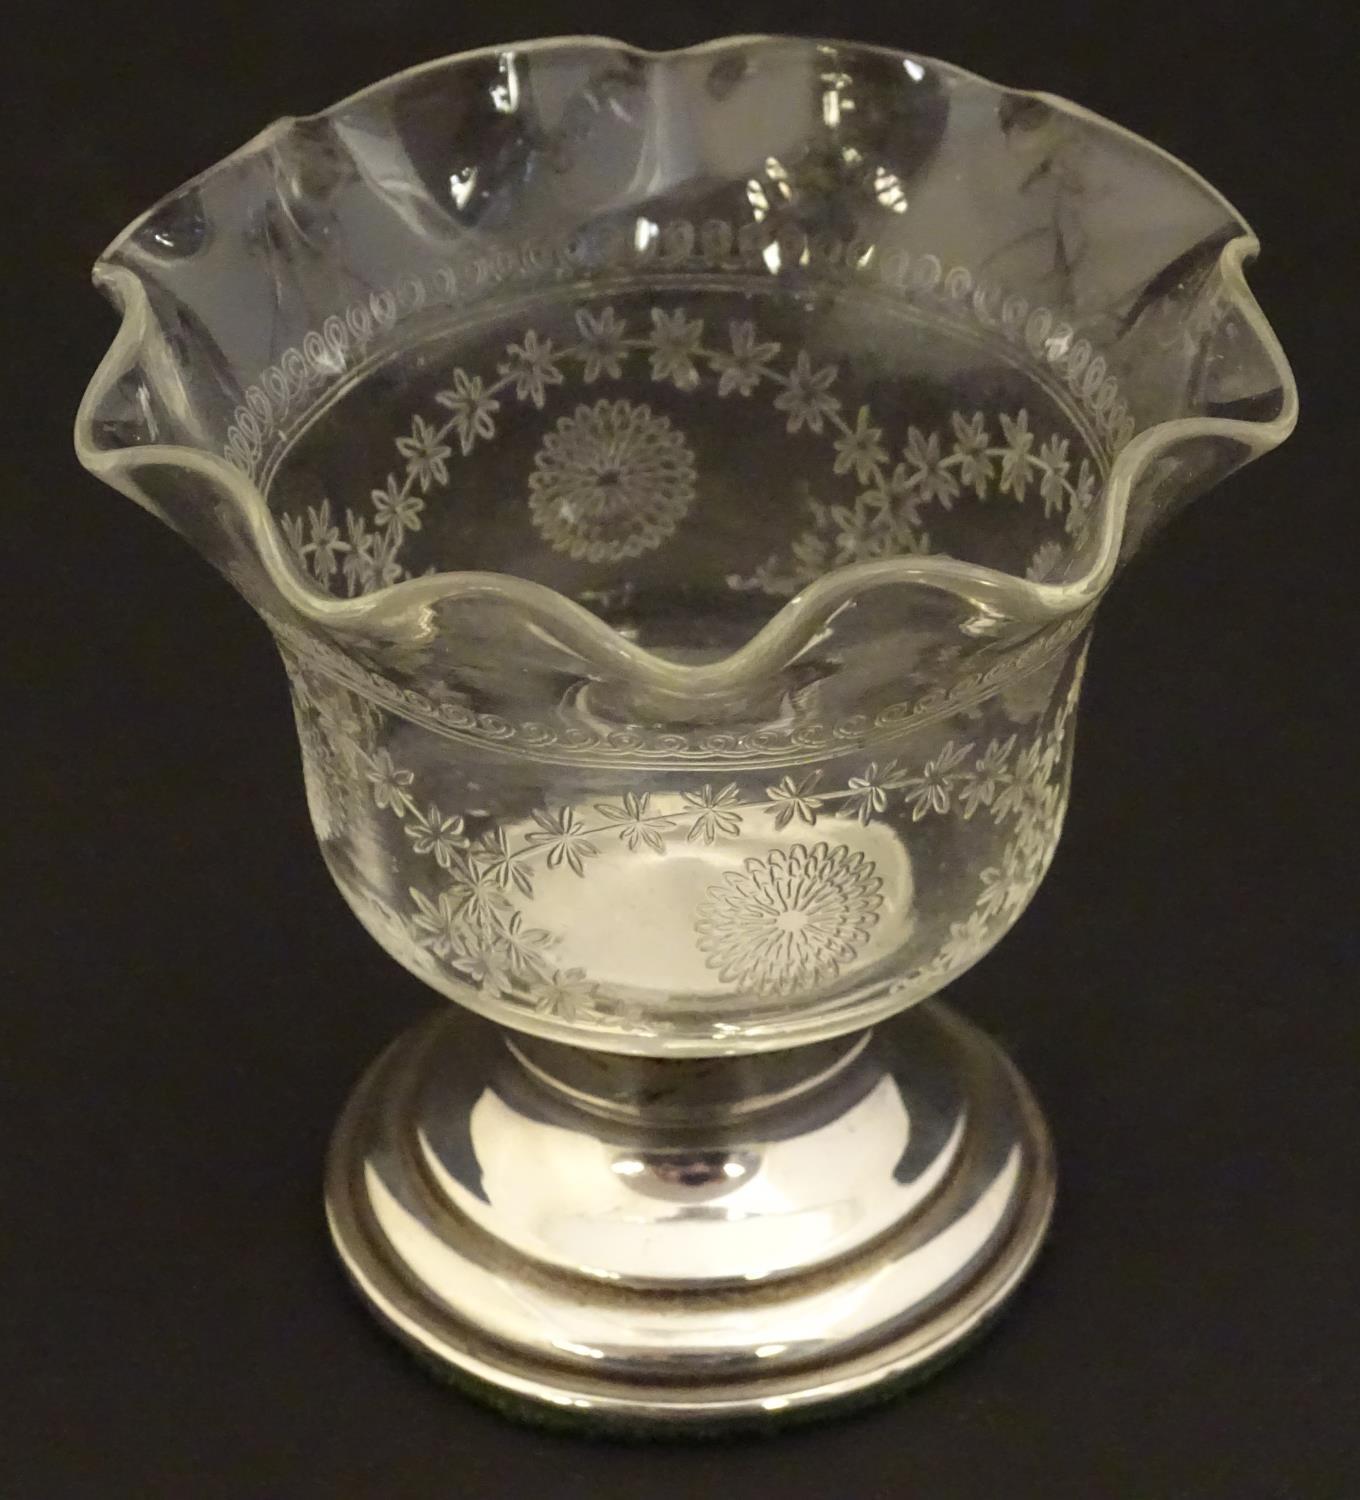 An early 20thC small glass dish with etched decoration and flared rim, on a silver pedestal base - Image 4 of 7